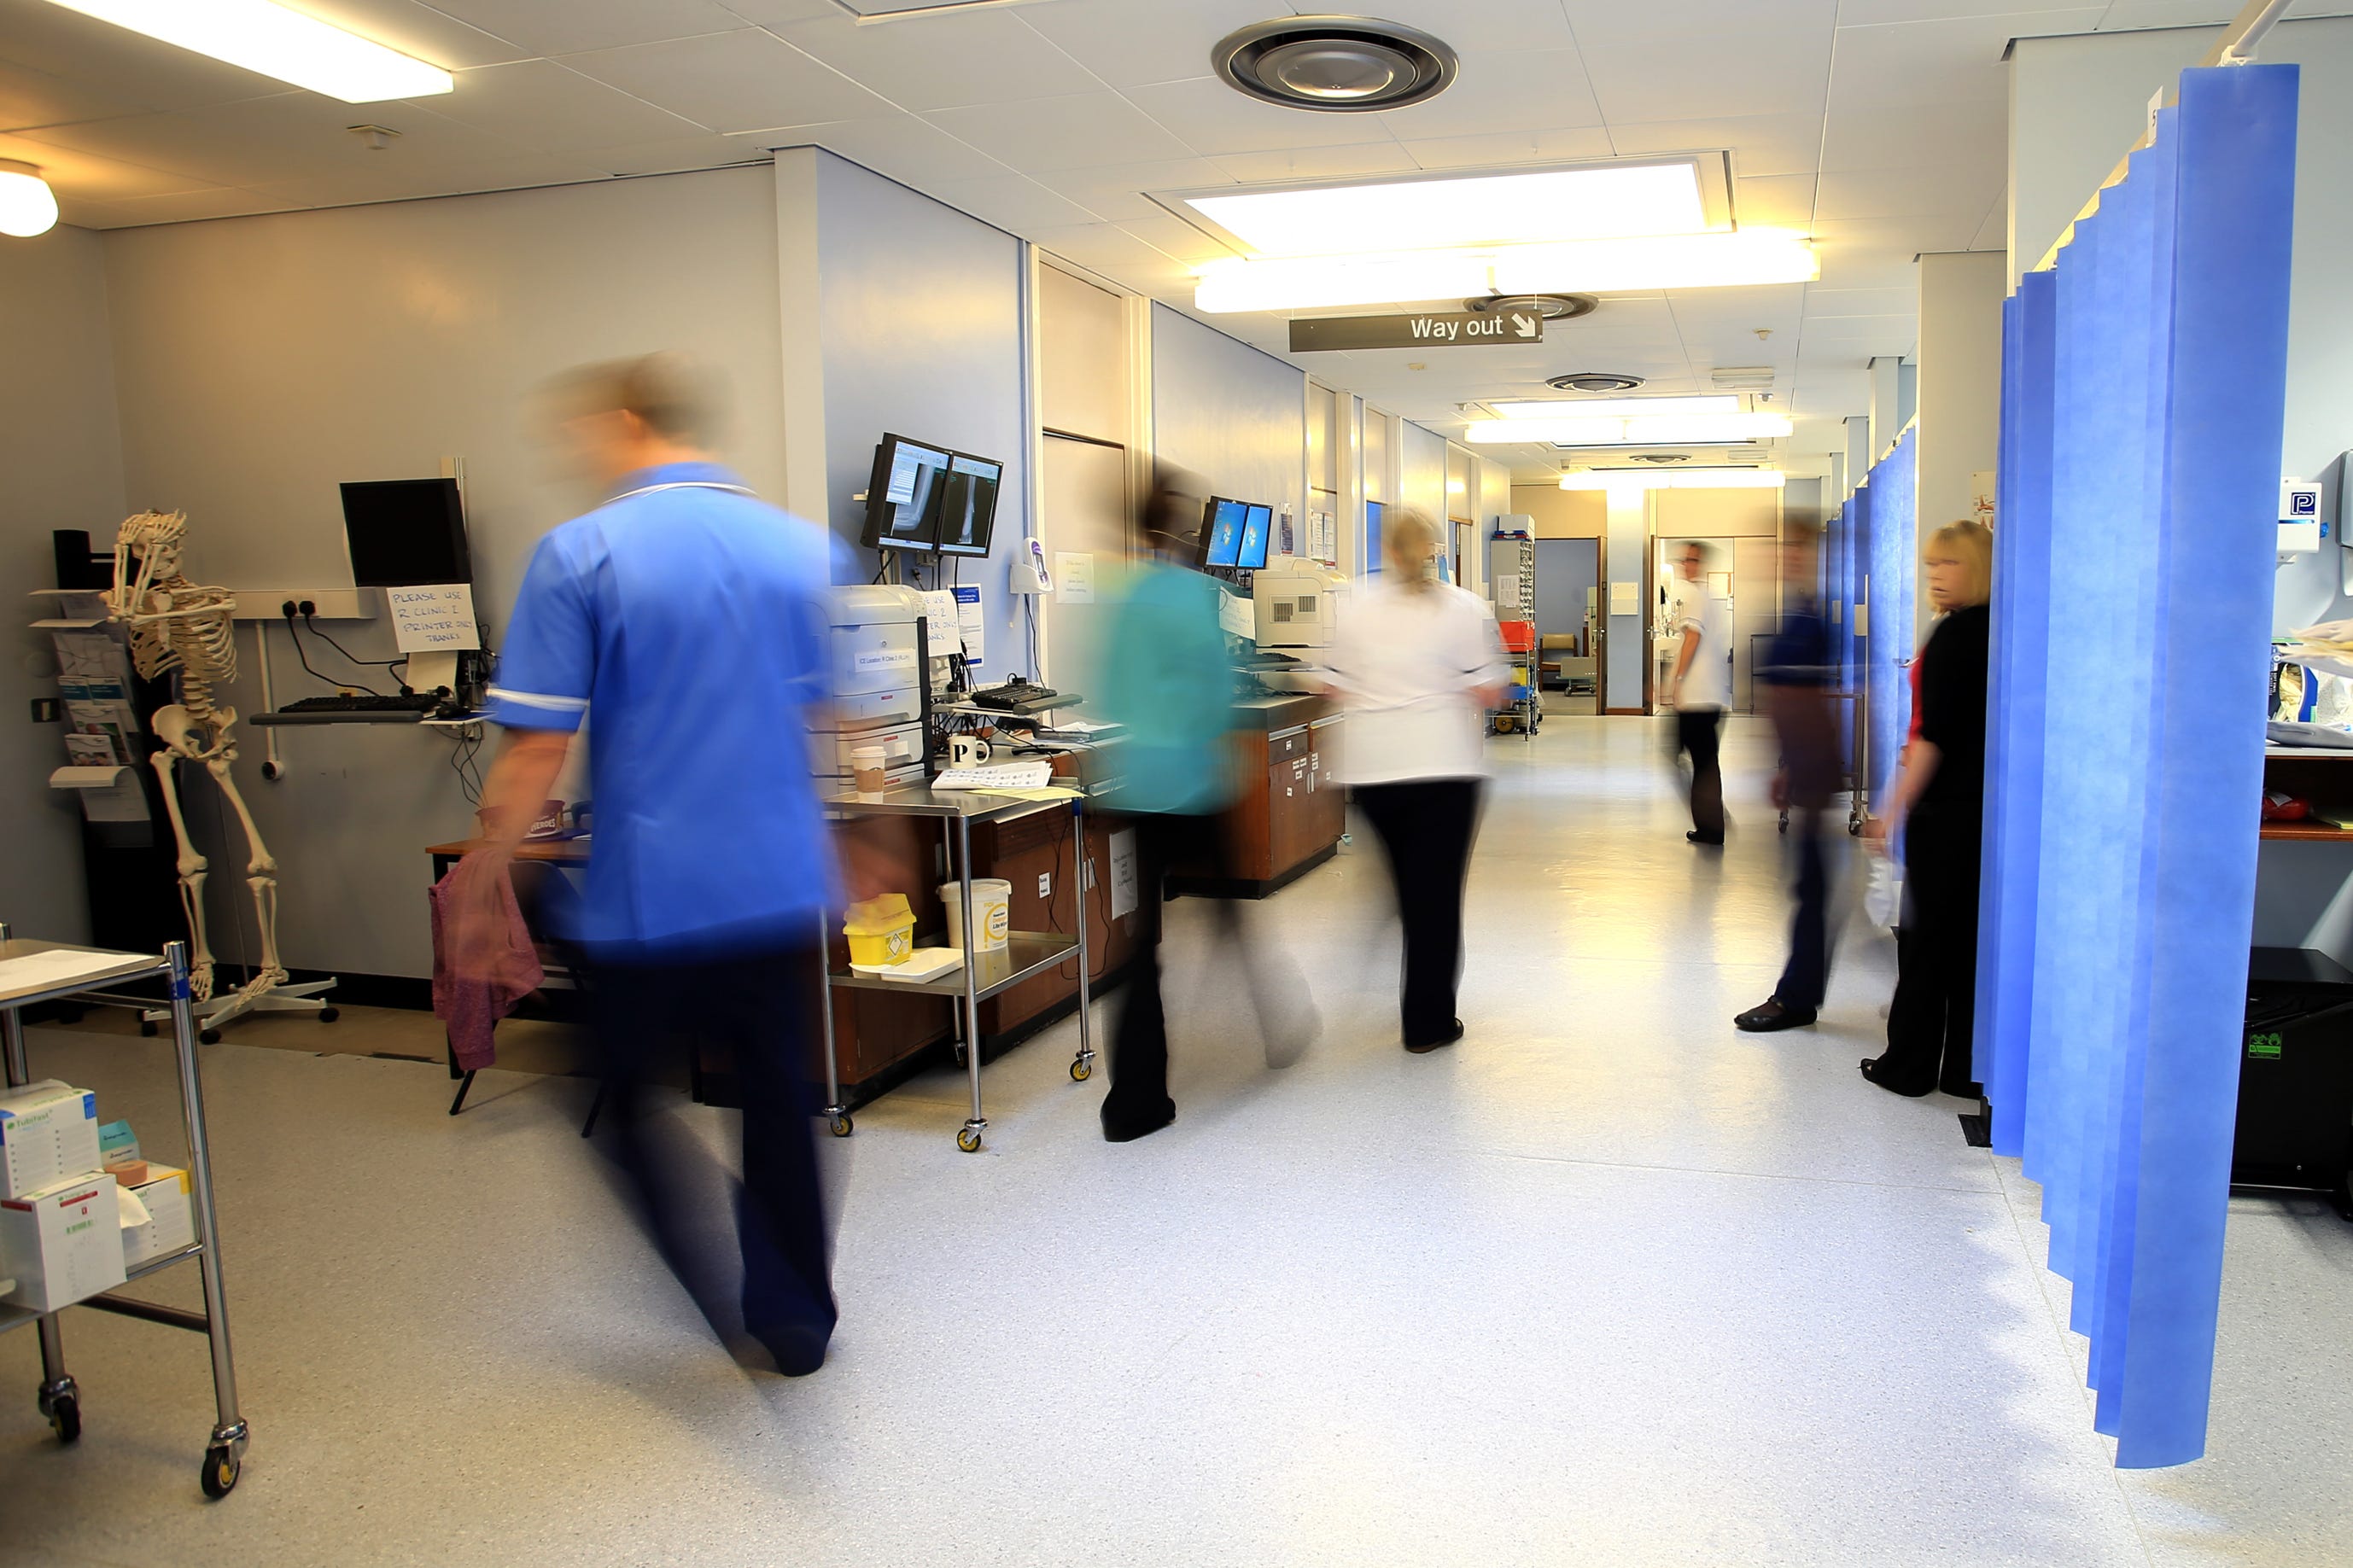 shock results reveal how many nhs staff are looking to leave health service